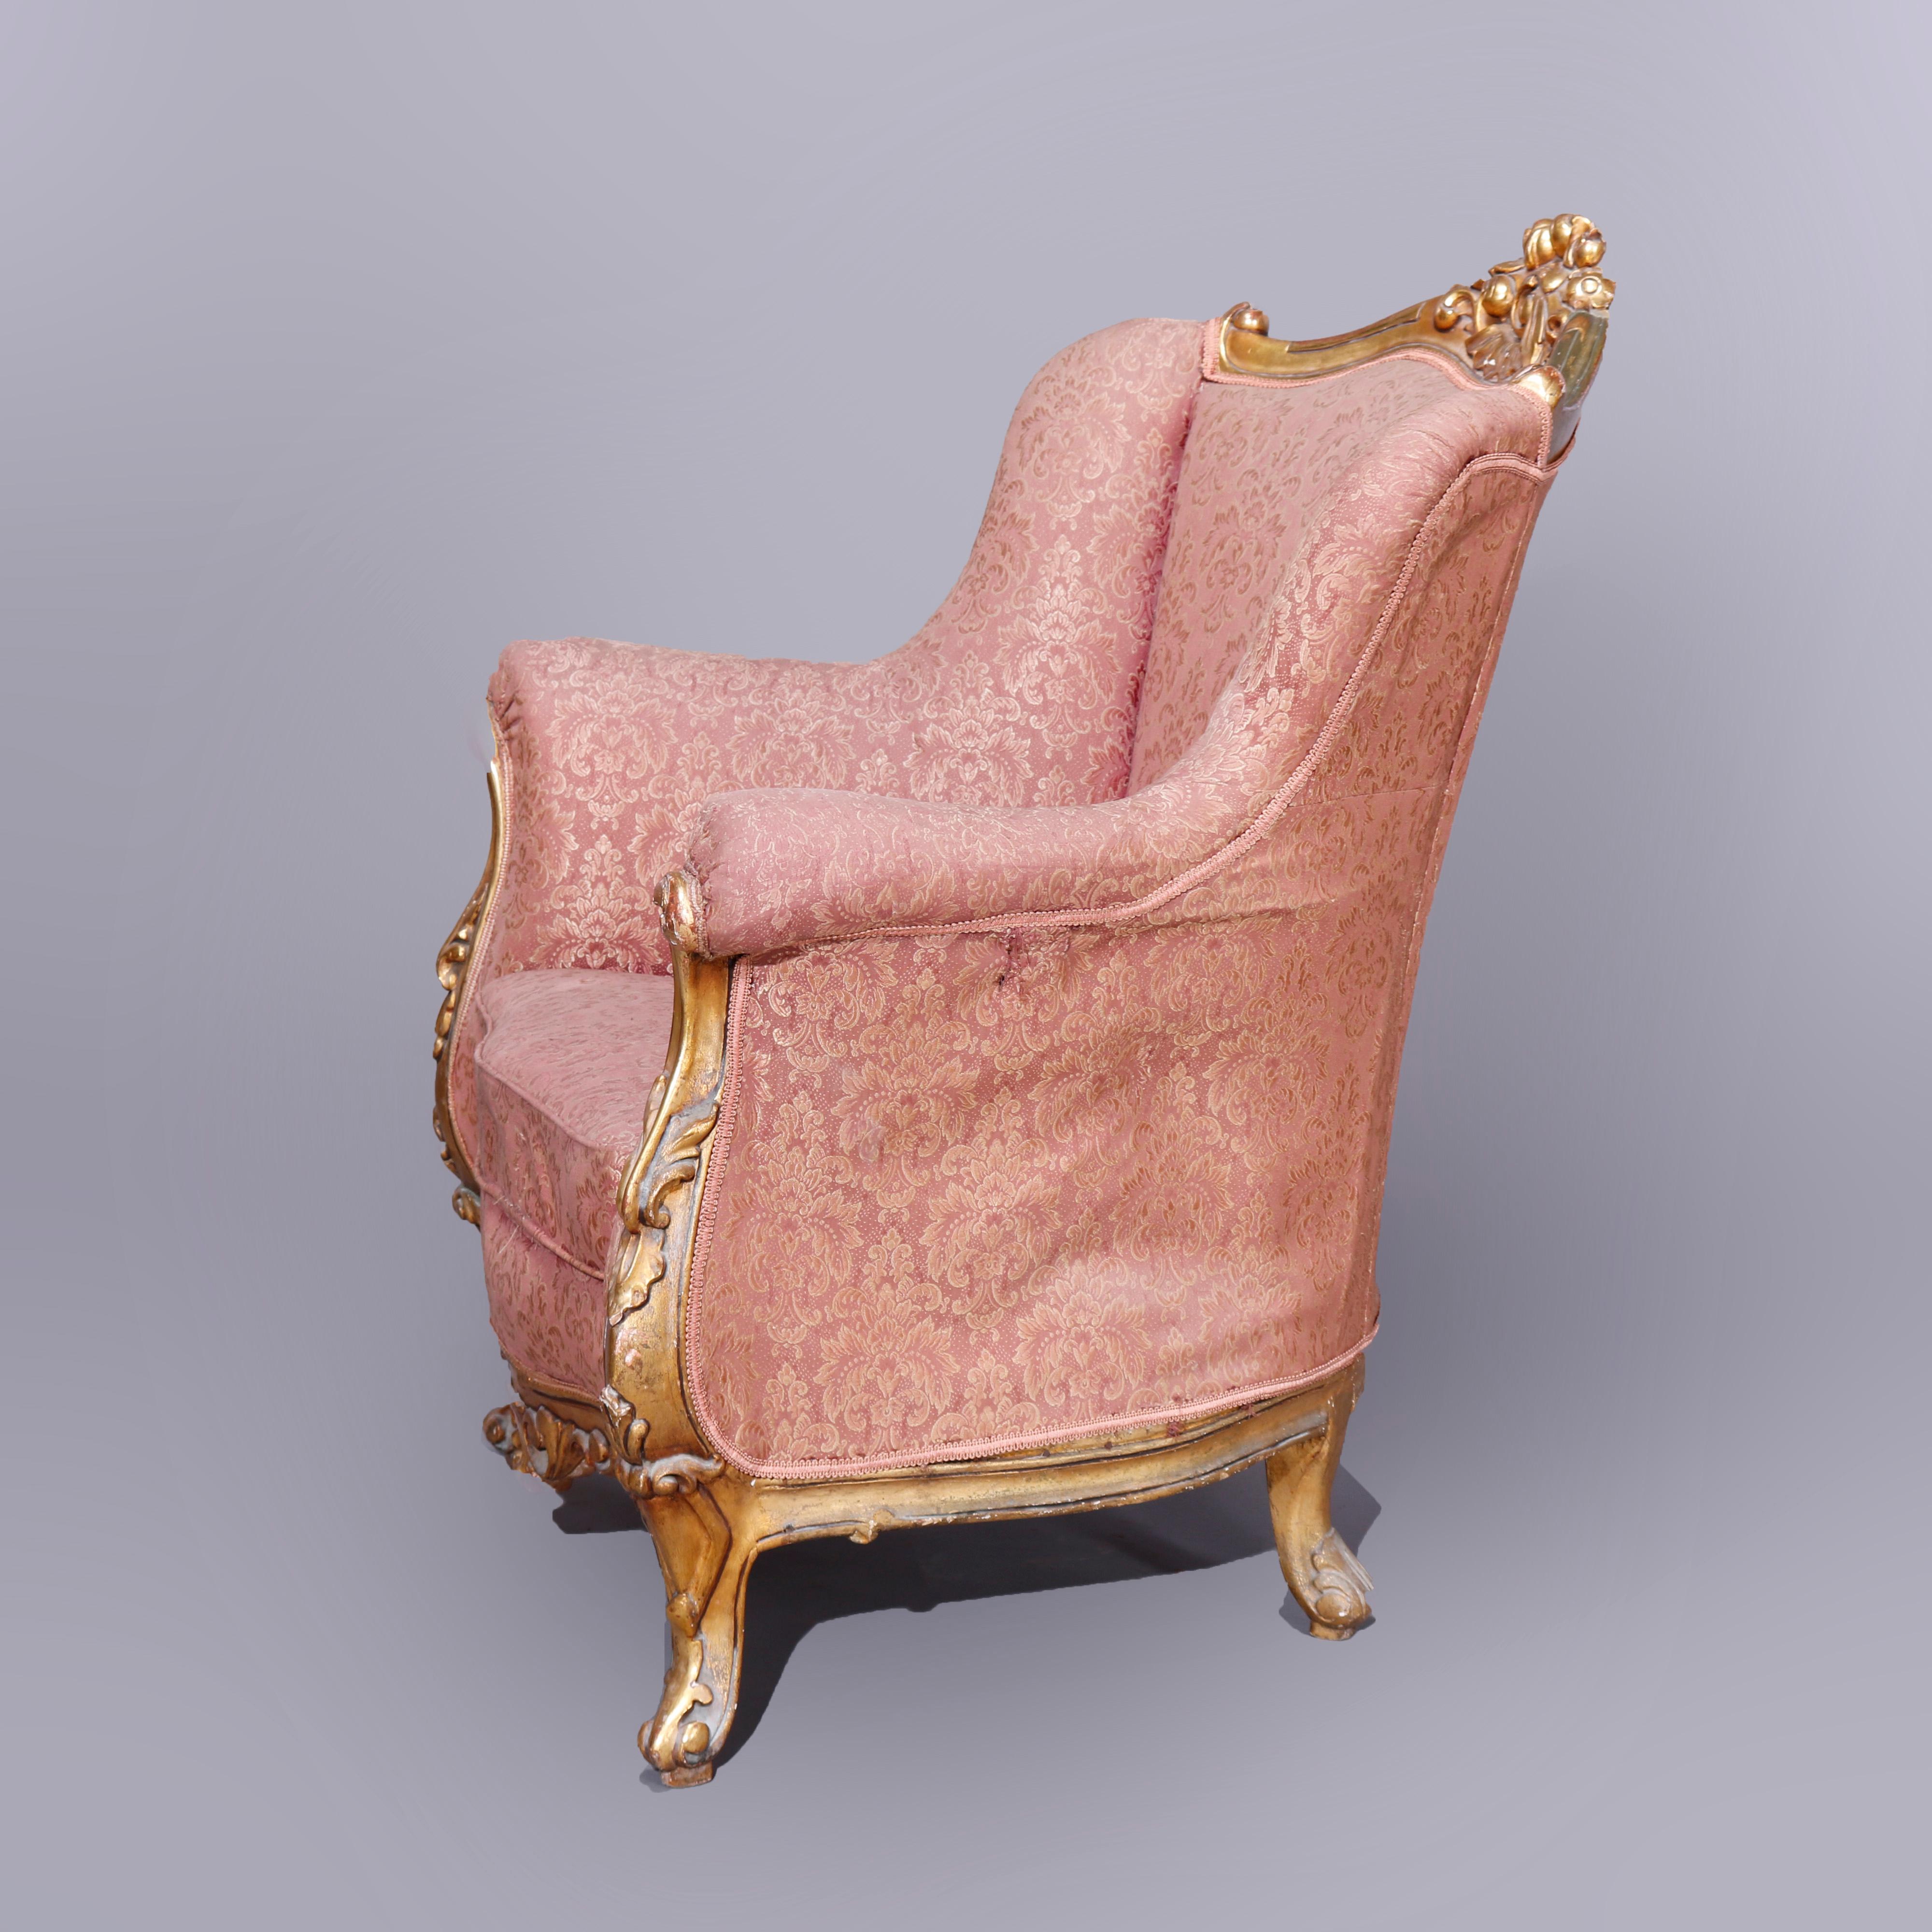 20th Century Pair Antique French Louis XIV Gilt Wood Upholstered Wing Back Chairs, Circa 1910